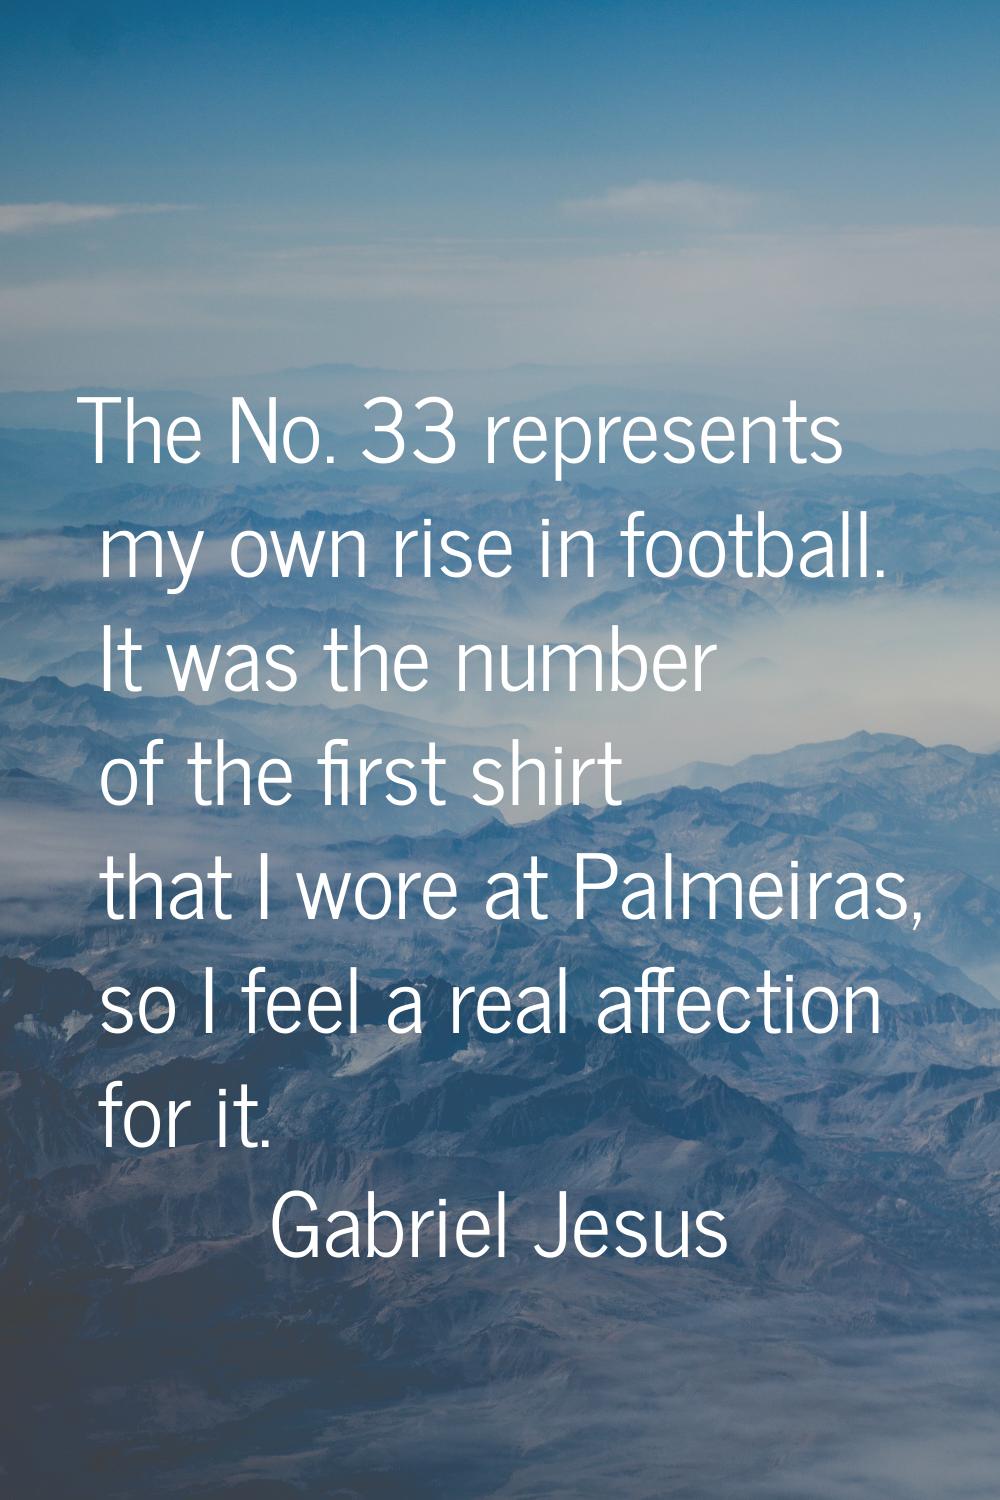 The No. 33 represents my own rise in football. It was the number of the first shirt that I wore at 